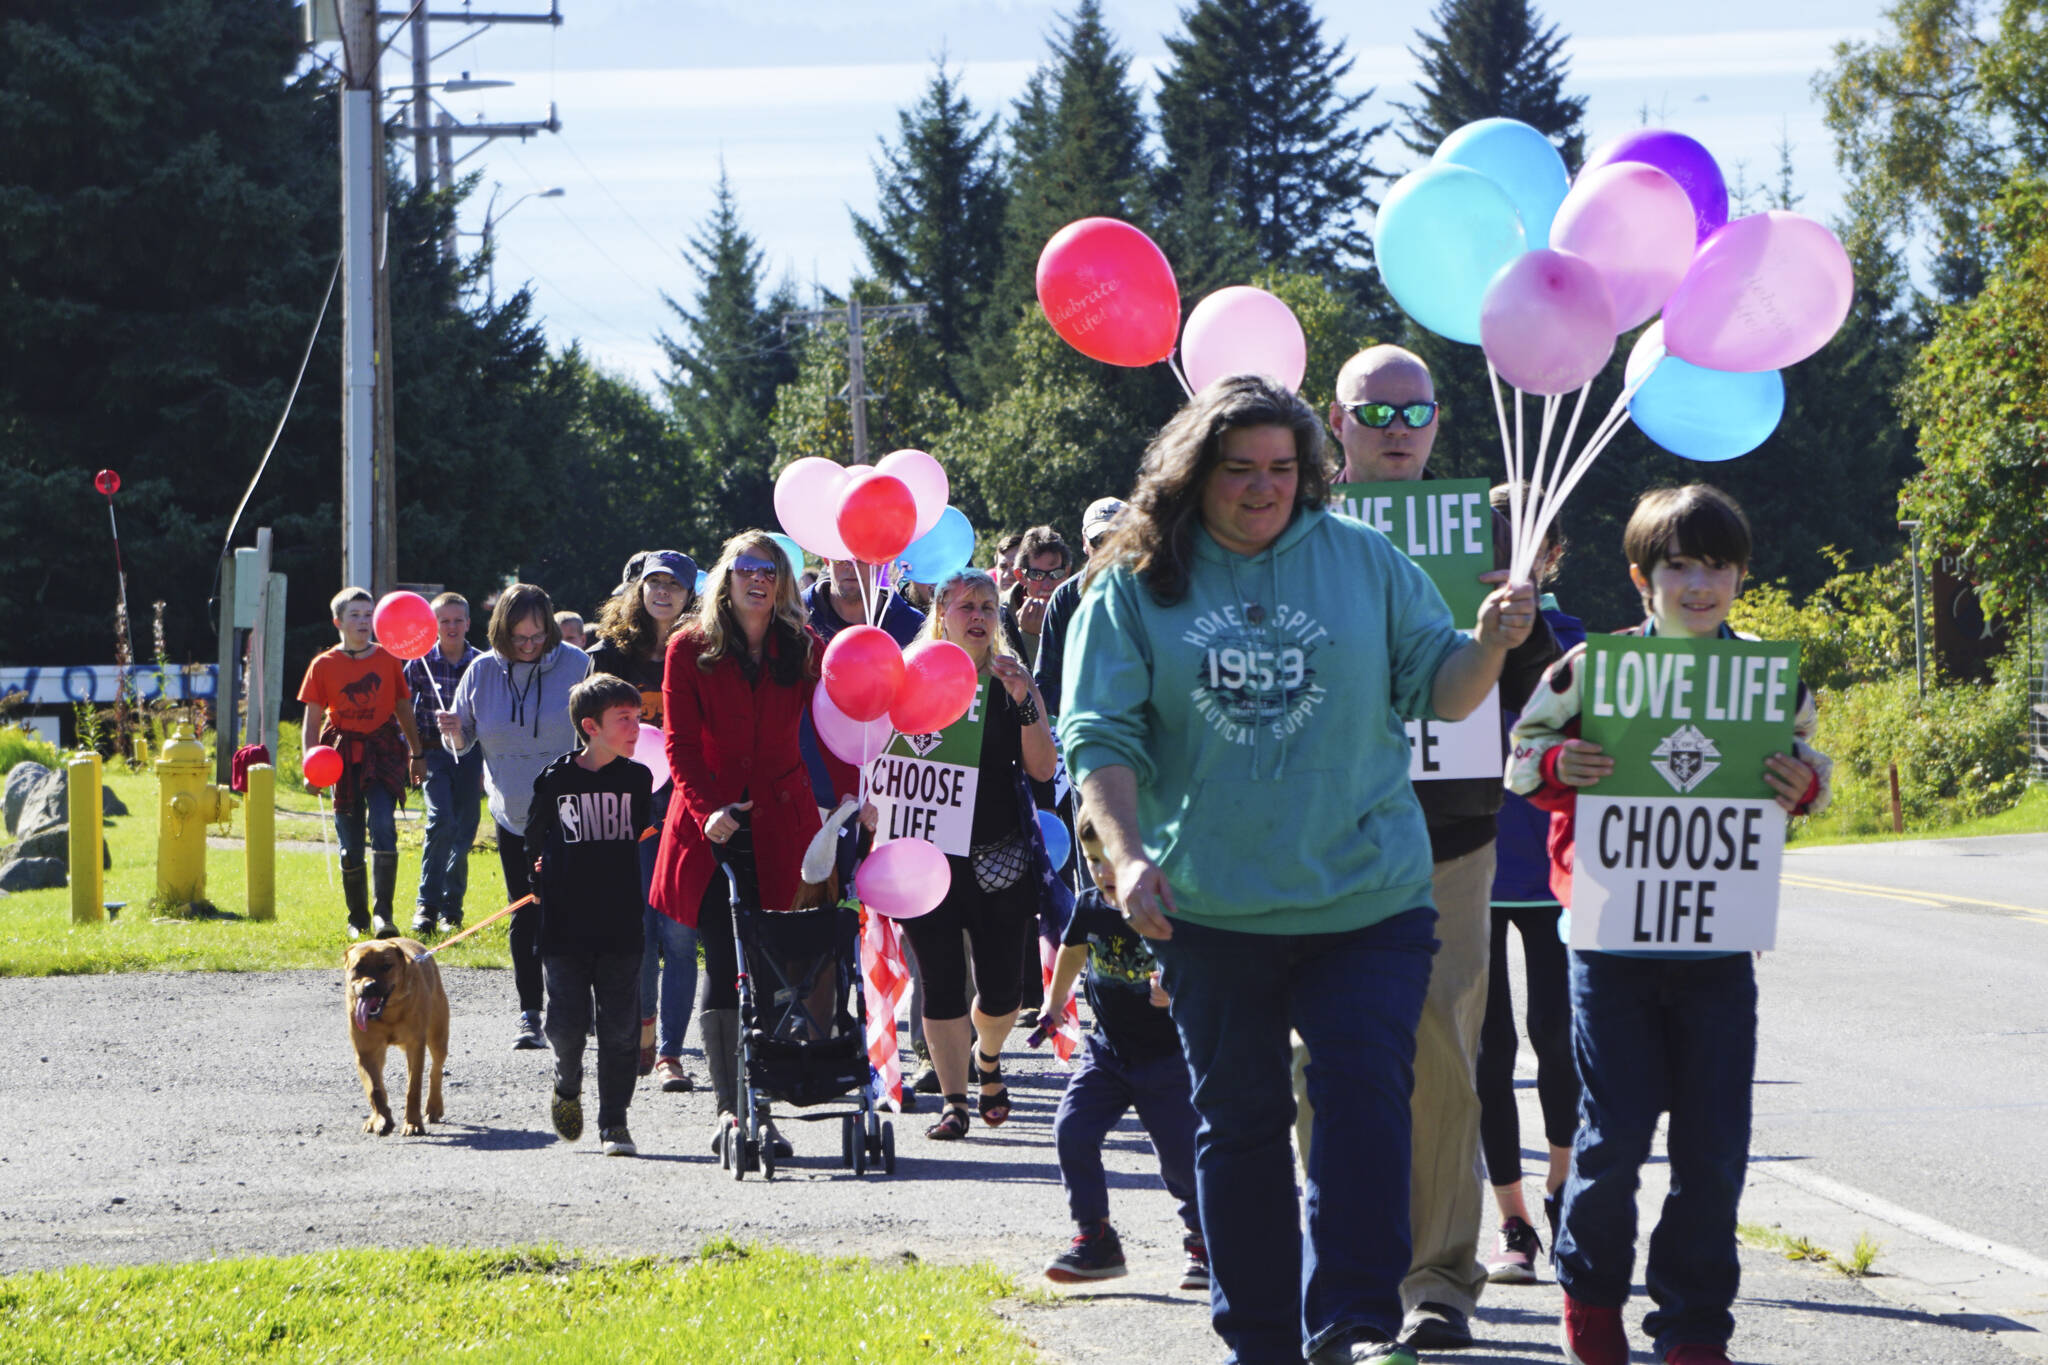 Photo by Michael Armstrong/Homer News
People with Walk for Life march up Bartlett Street to the Water’s Edge crisis pregnancy clinic on Monday, Sept. 5, 2022, in Homer, Alaska. About 140 people walked from the Assembly of God Church and Glacier View Baptist Church on East End Road along Pioneer Avenue and up Bartlett Street to show their support for pro-life efforts and opposition to abortion.